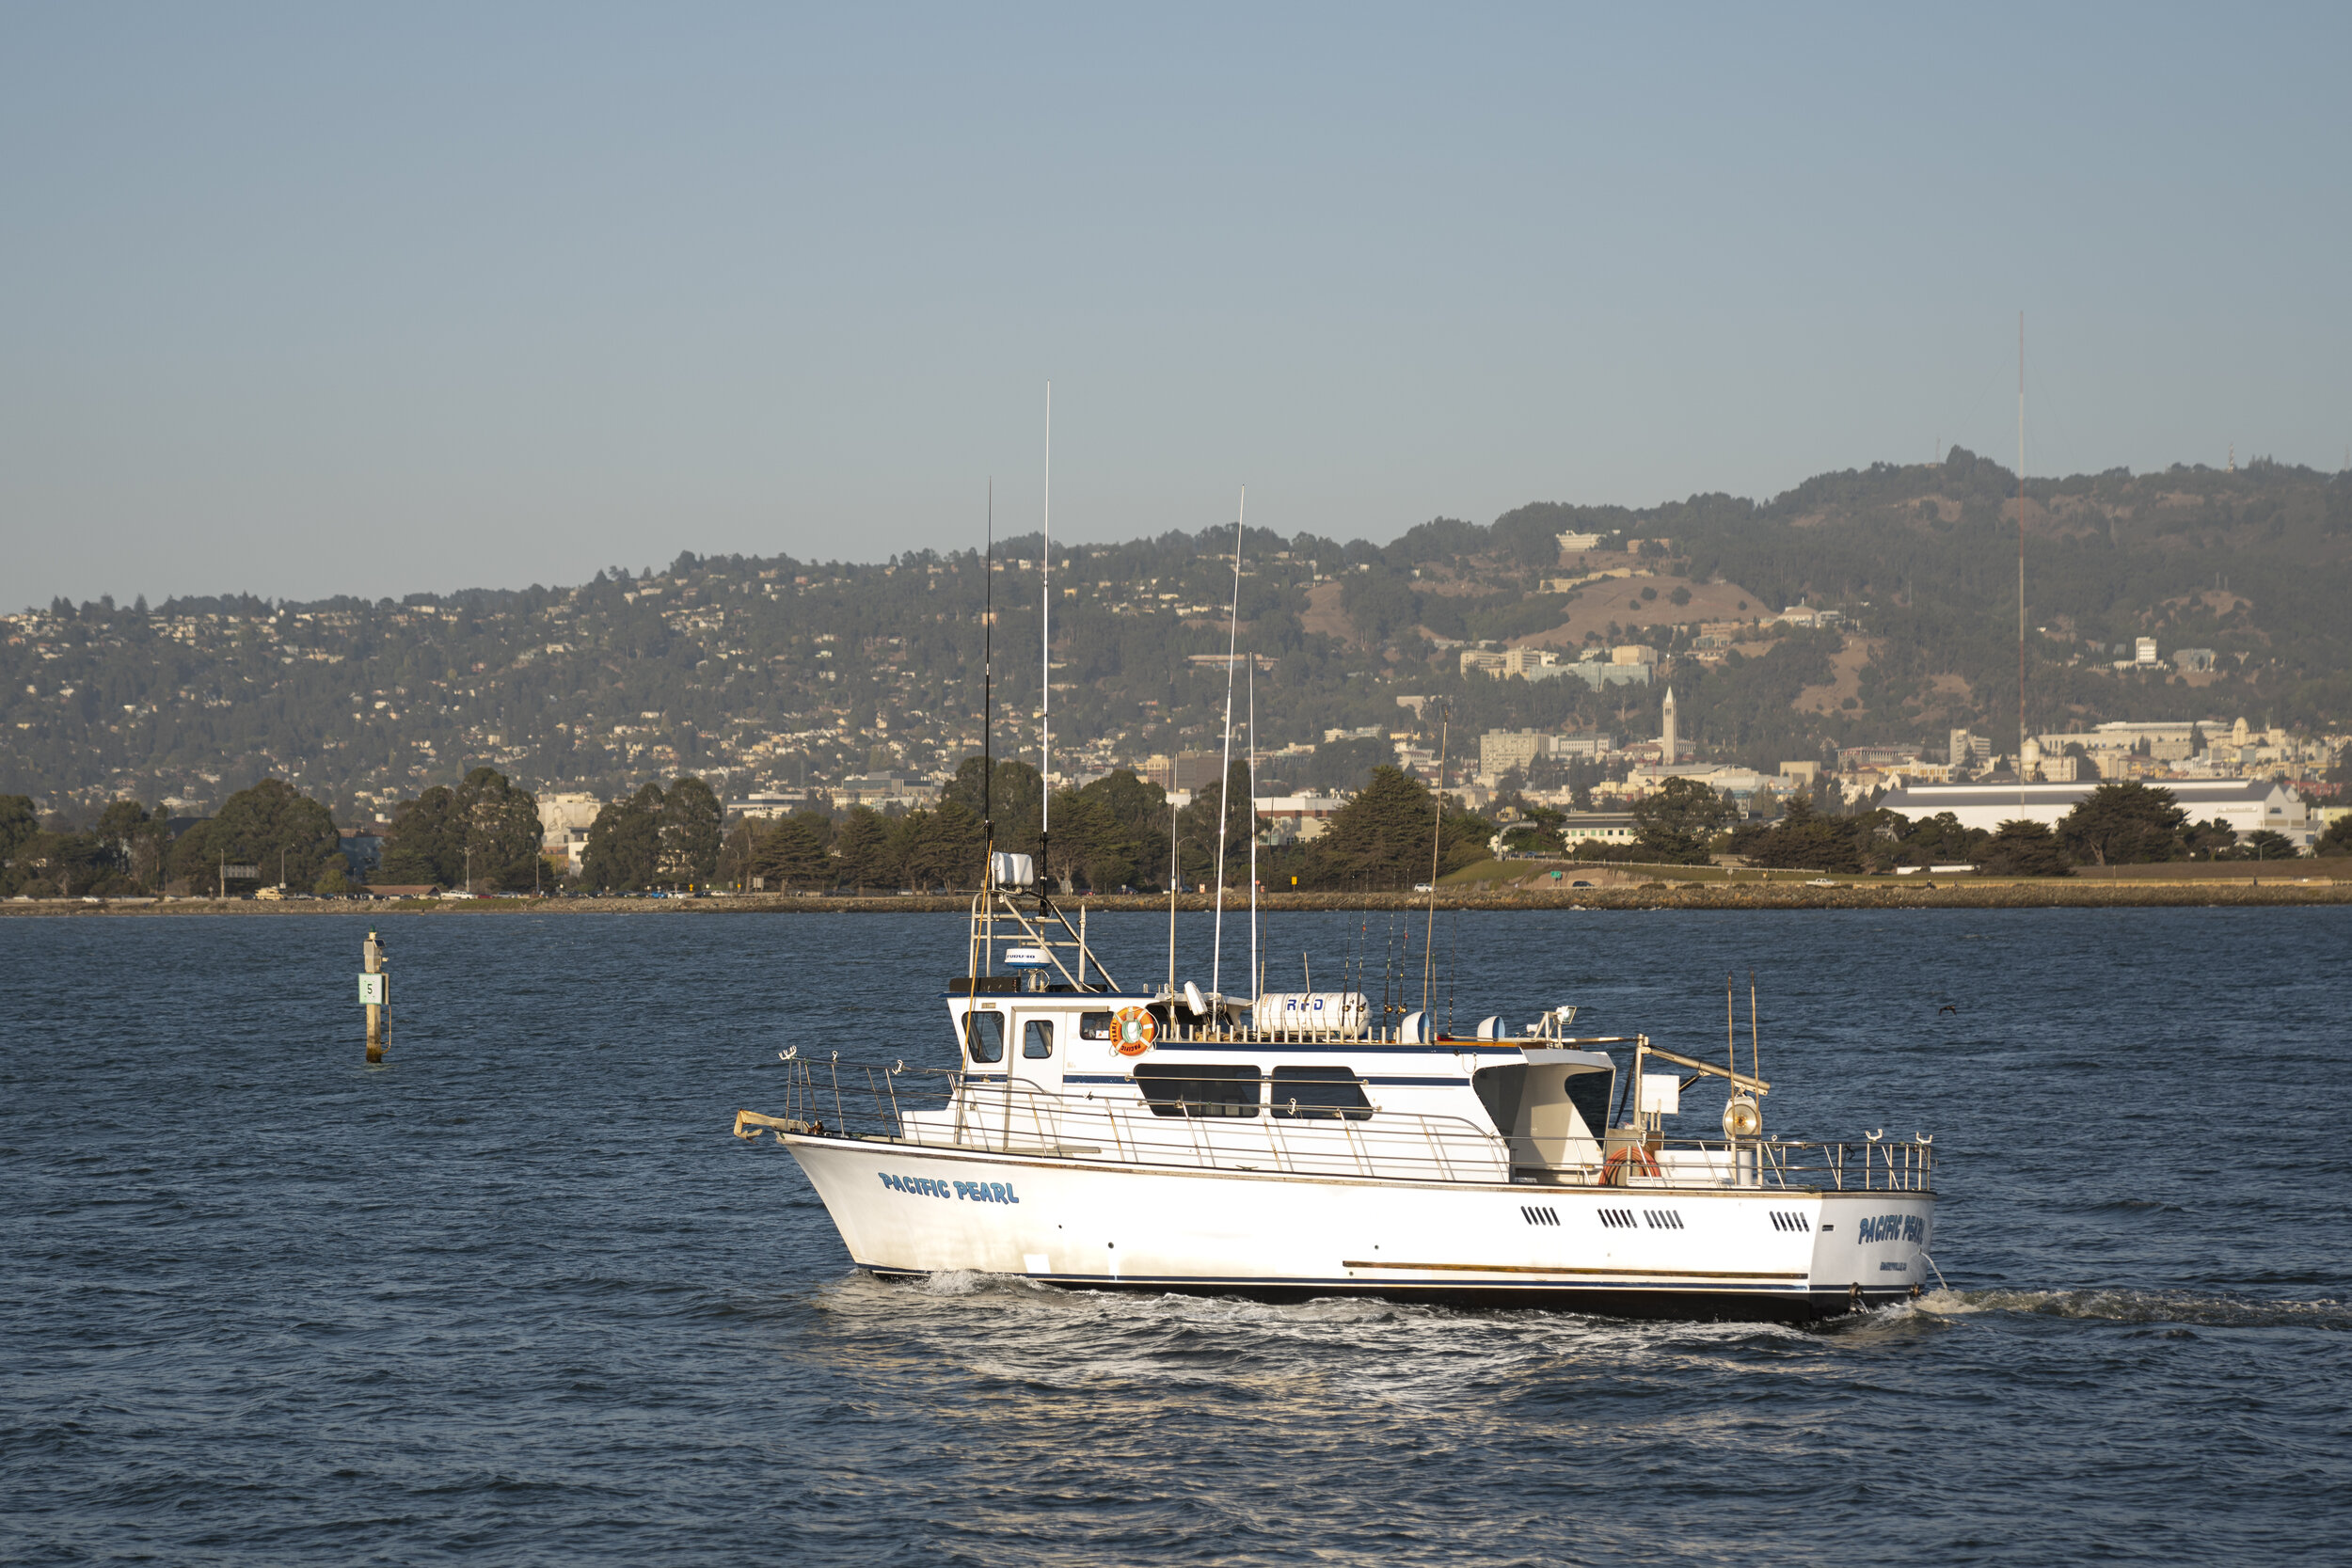 About Us — Pacific Pearl Charters